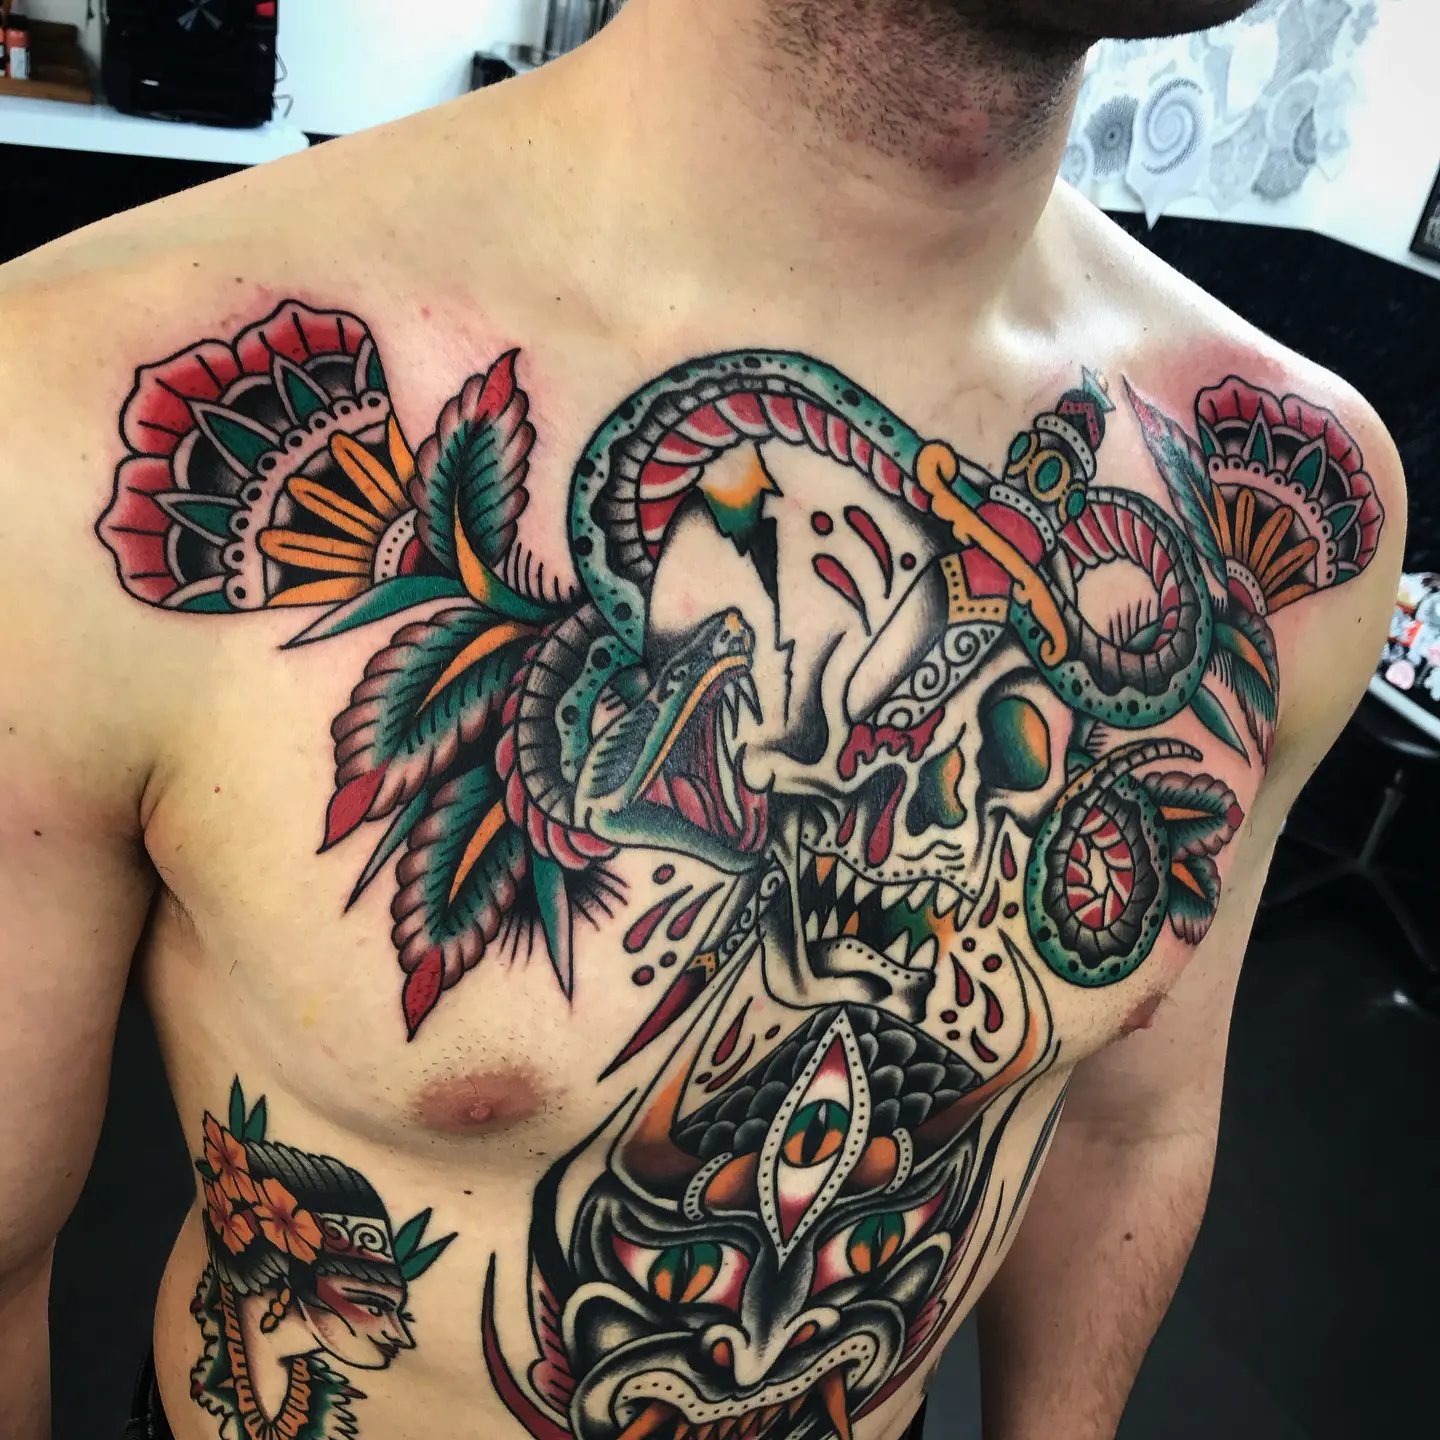 American Traditional Tattoos History Meanings Artists Designs Traditional  Back Tattoo Traditional Tattoo Girls Traditional Tattoo Woman   xn90absbknhbvgexnp1ai443